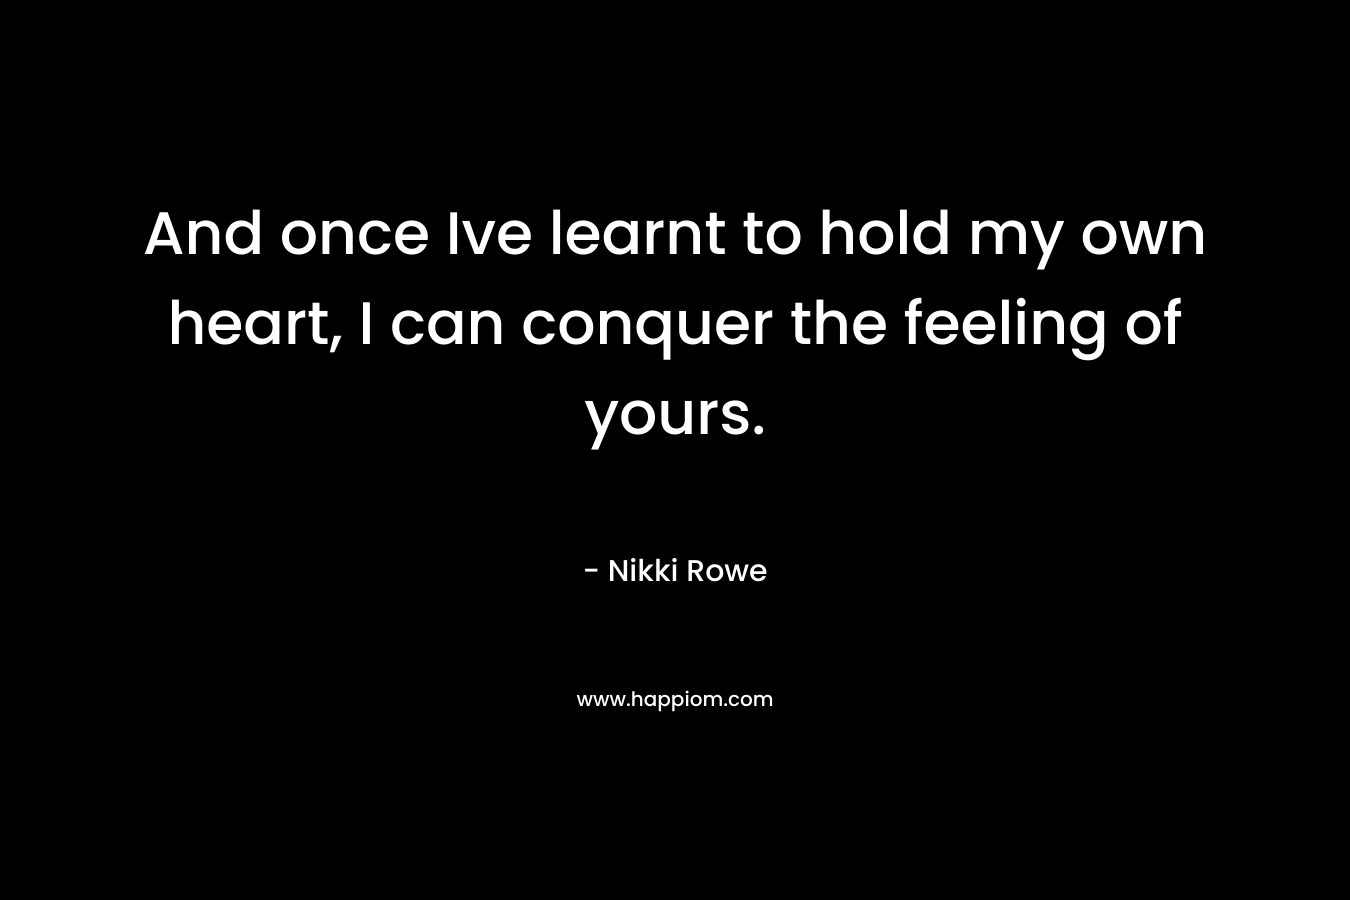 And once Ive learnt to hold my own heart, I can conquer the feeling of yours. – Nikki Rowe